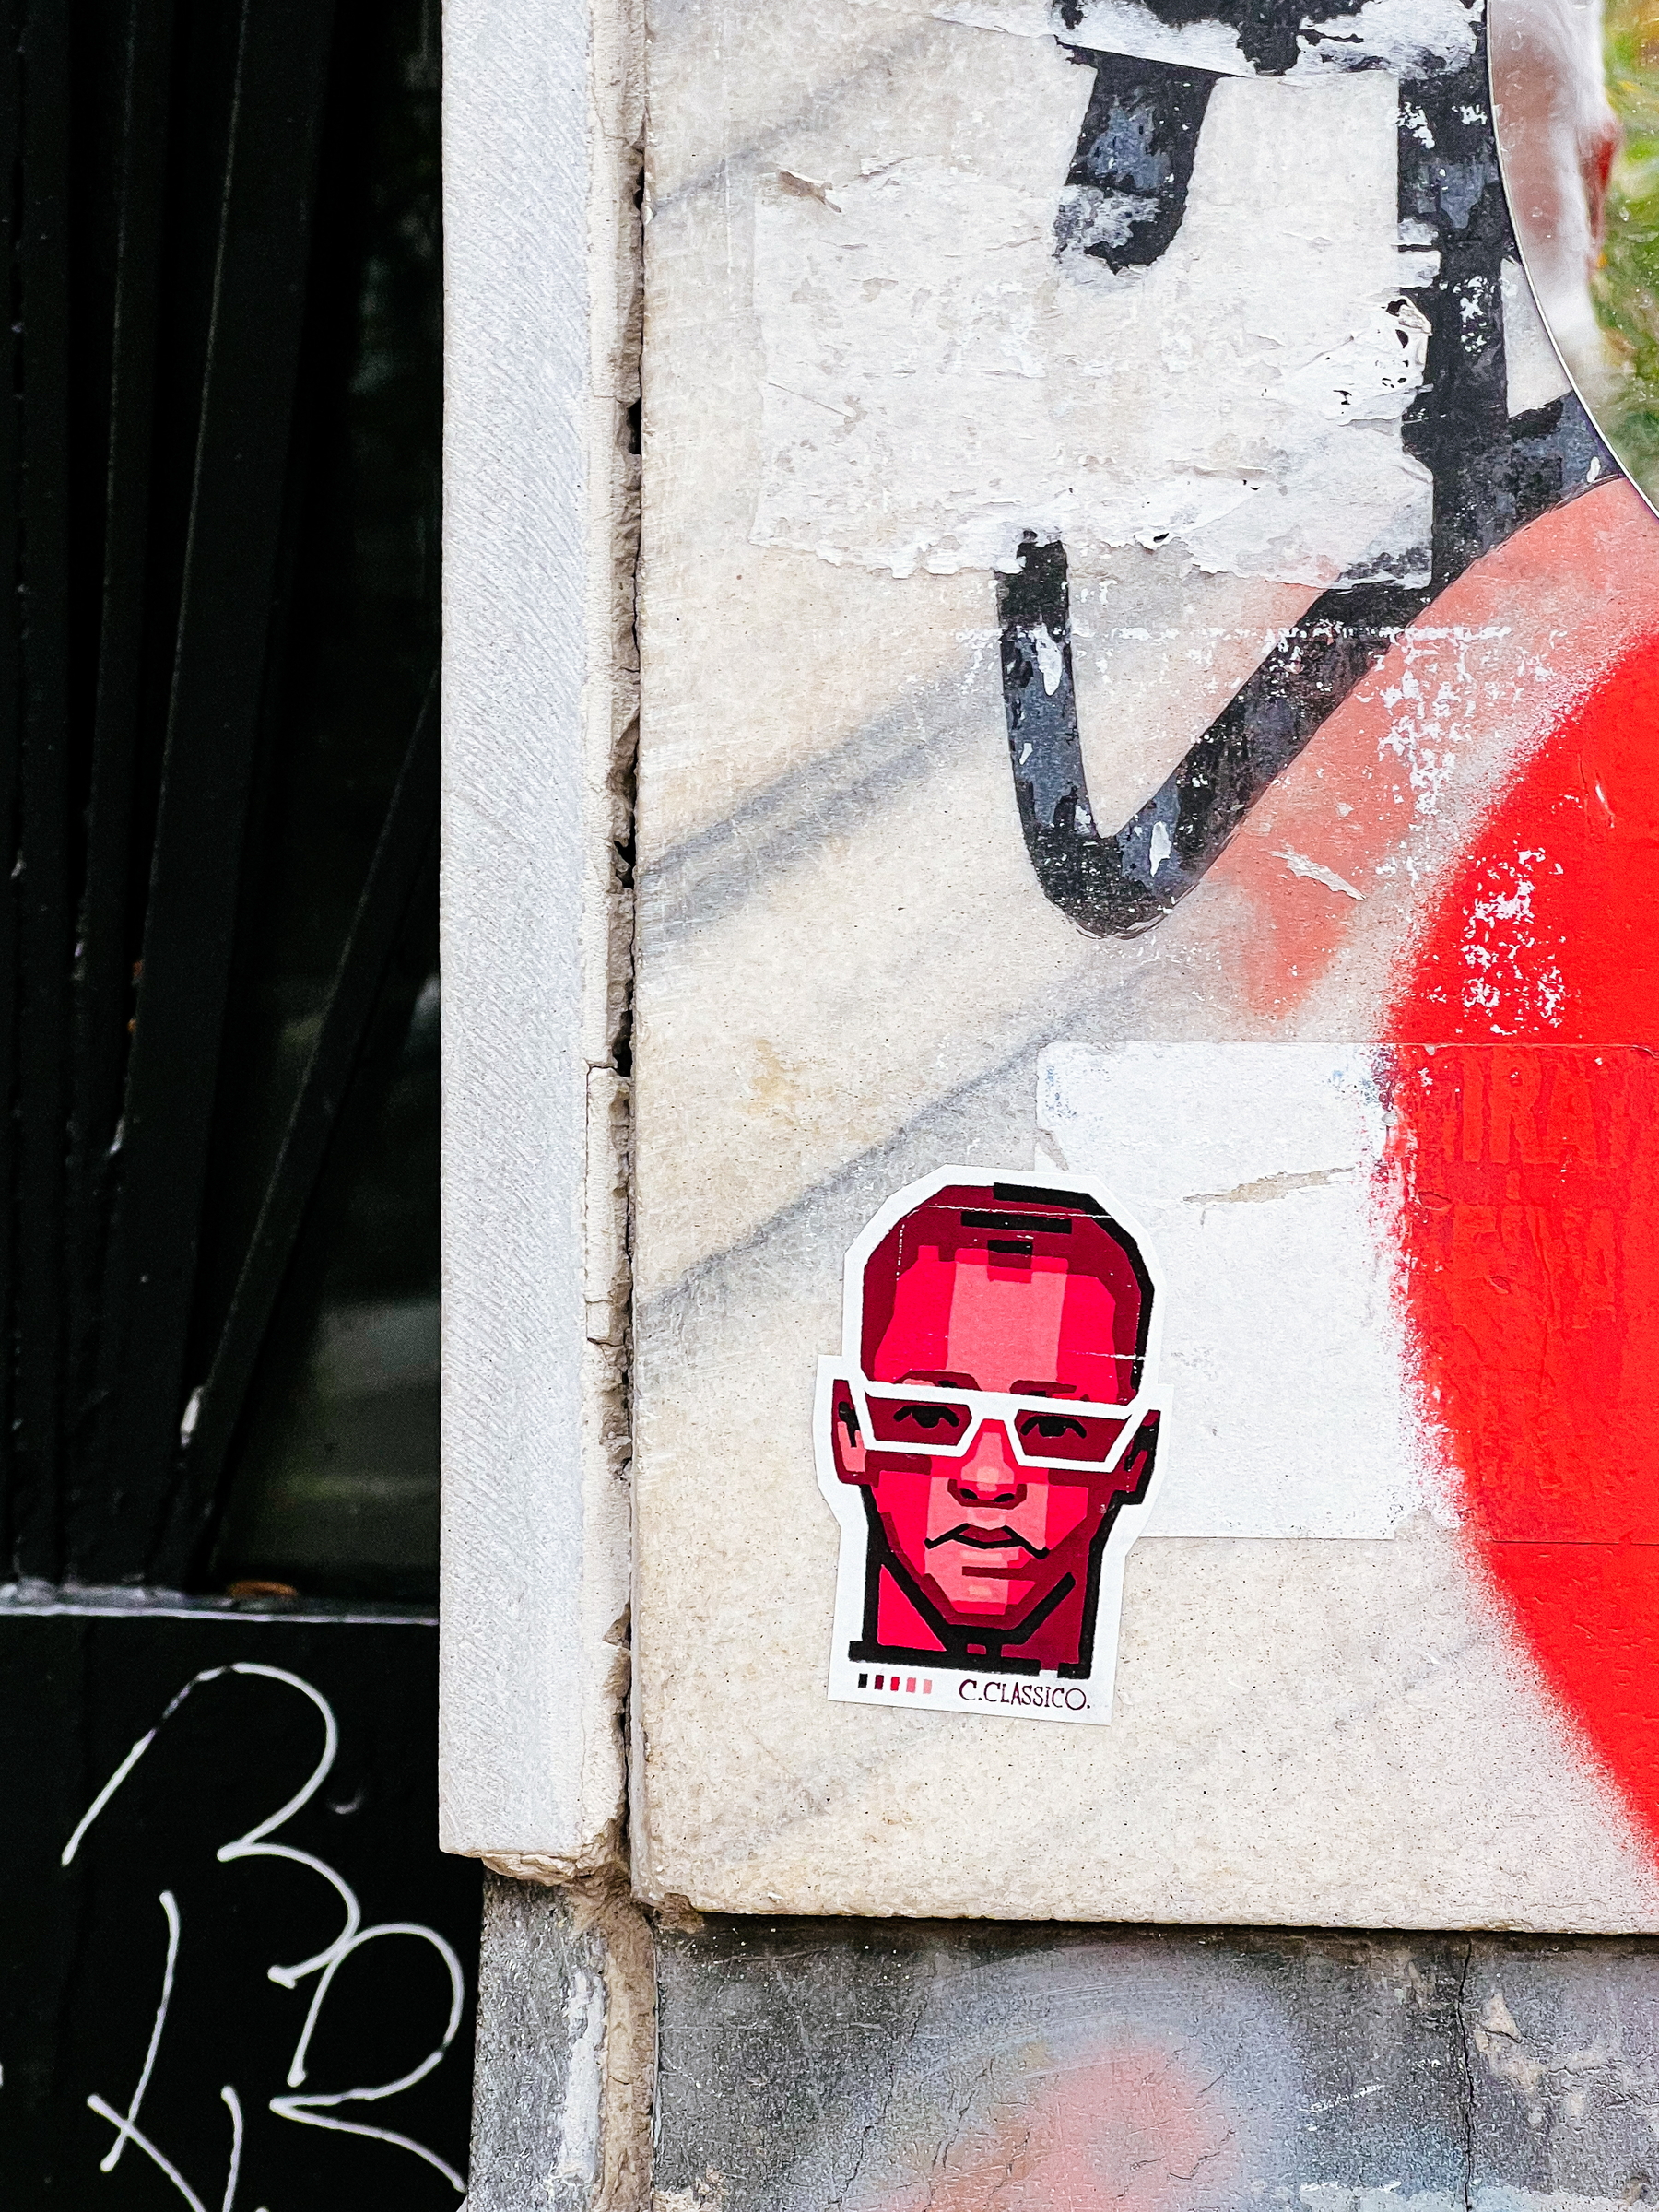 Red face. White shades. A sticker. 